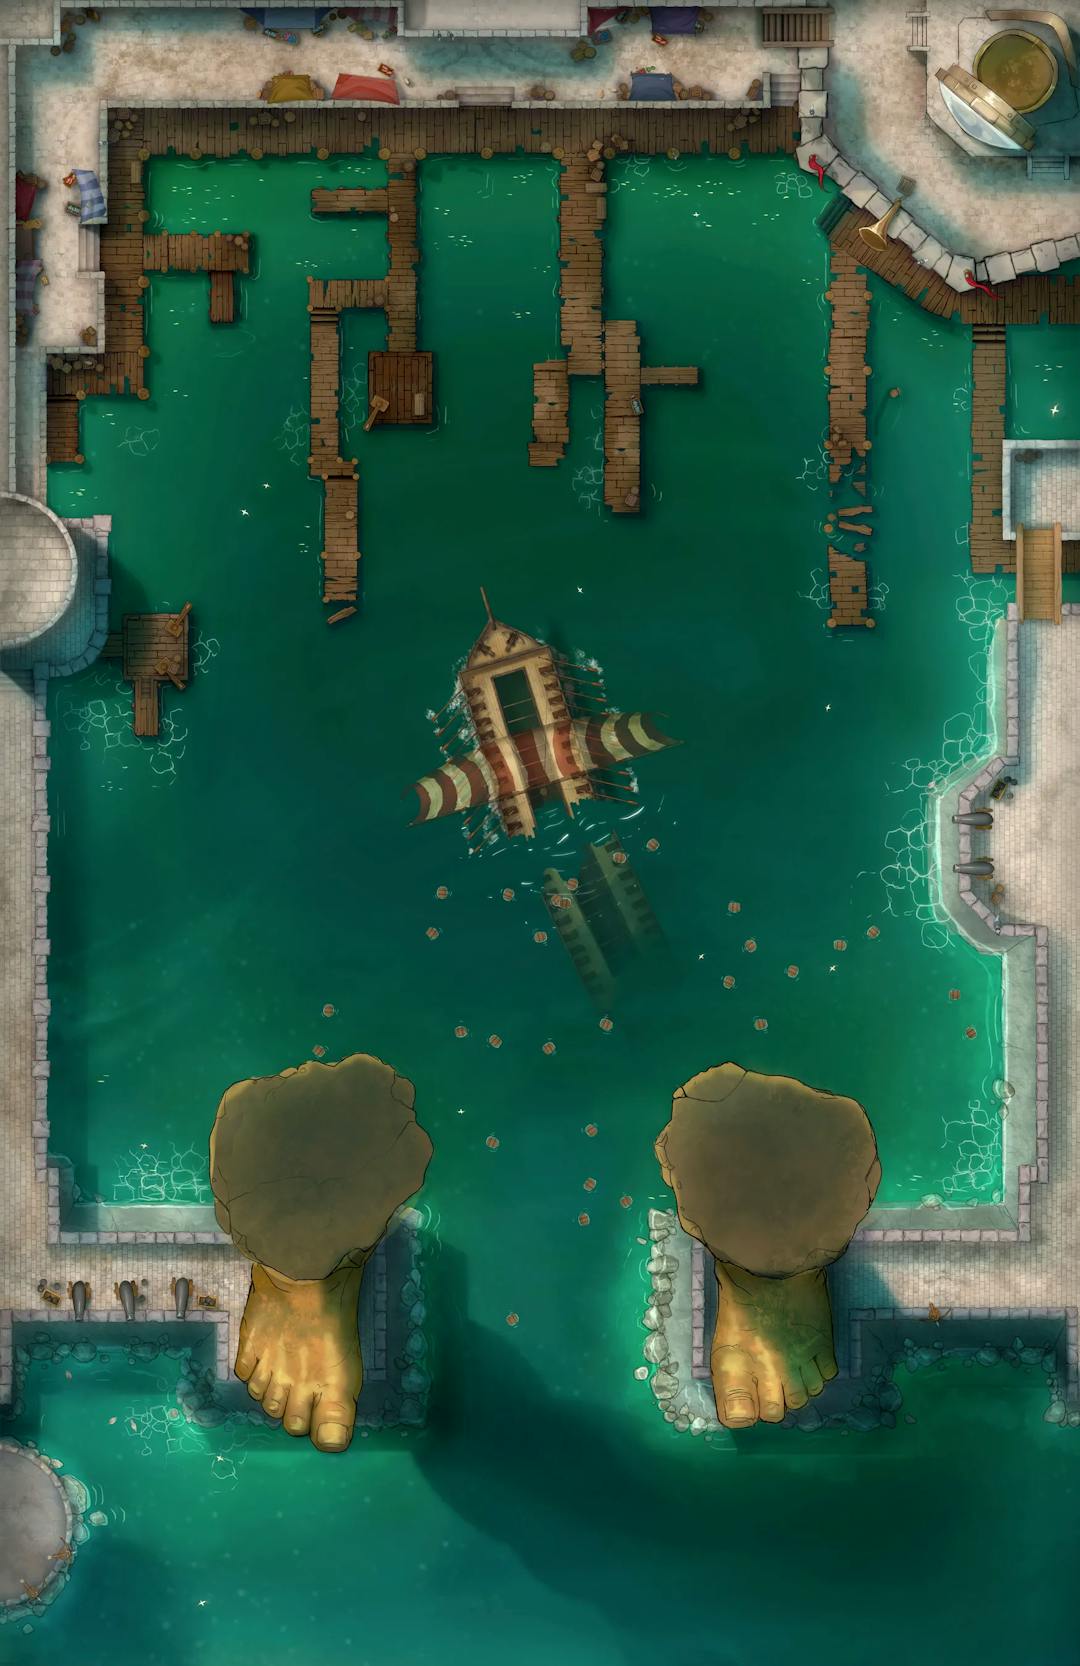 Colossus Port map, Shipwreck Day variant